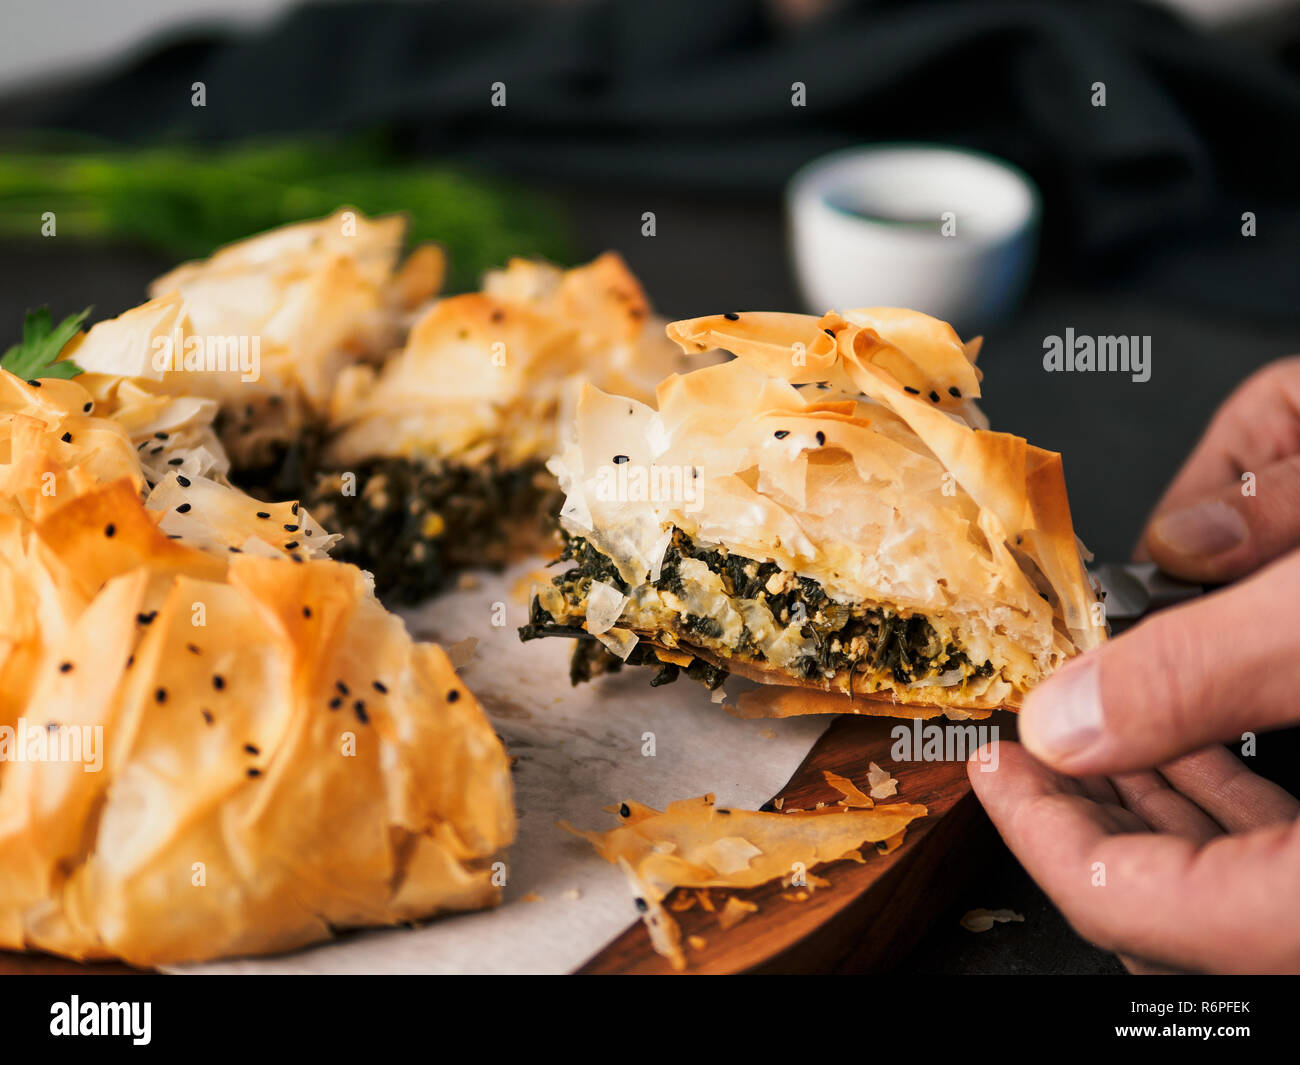 Slice of greek pie spanakopita in hand. Ideas and recipes for vegetarian or vegan Spanakopita Spinach Pie from fillo pastry cut in slices. Copy space. Side view Stock Photo